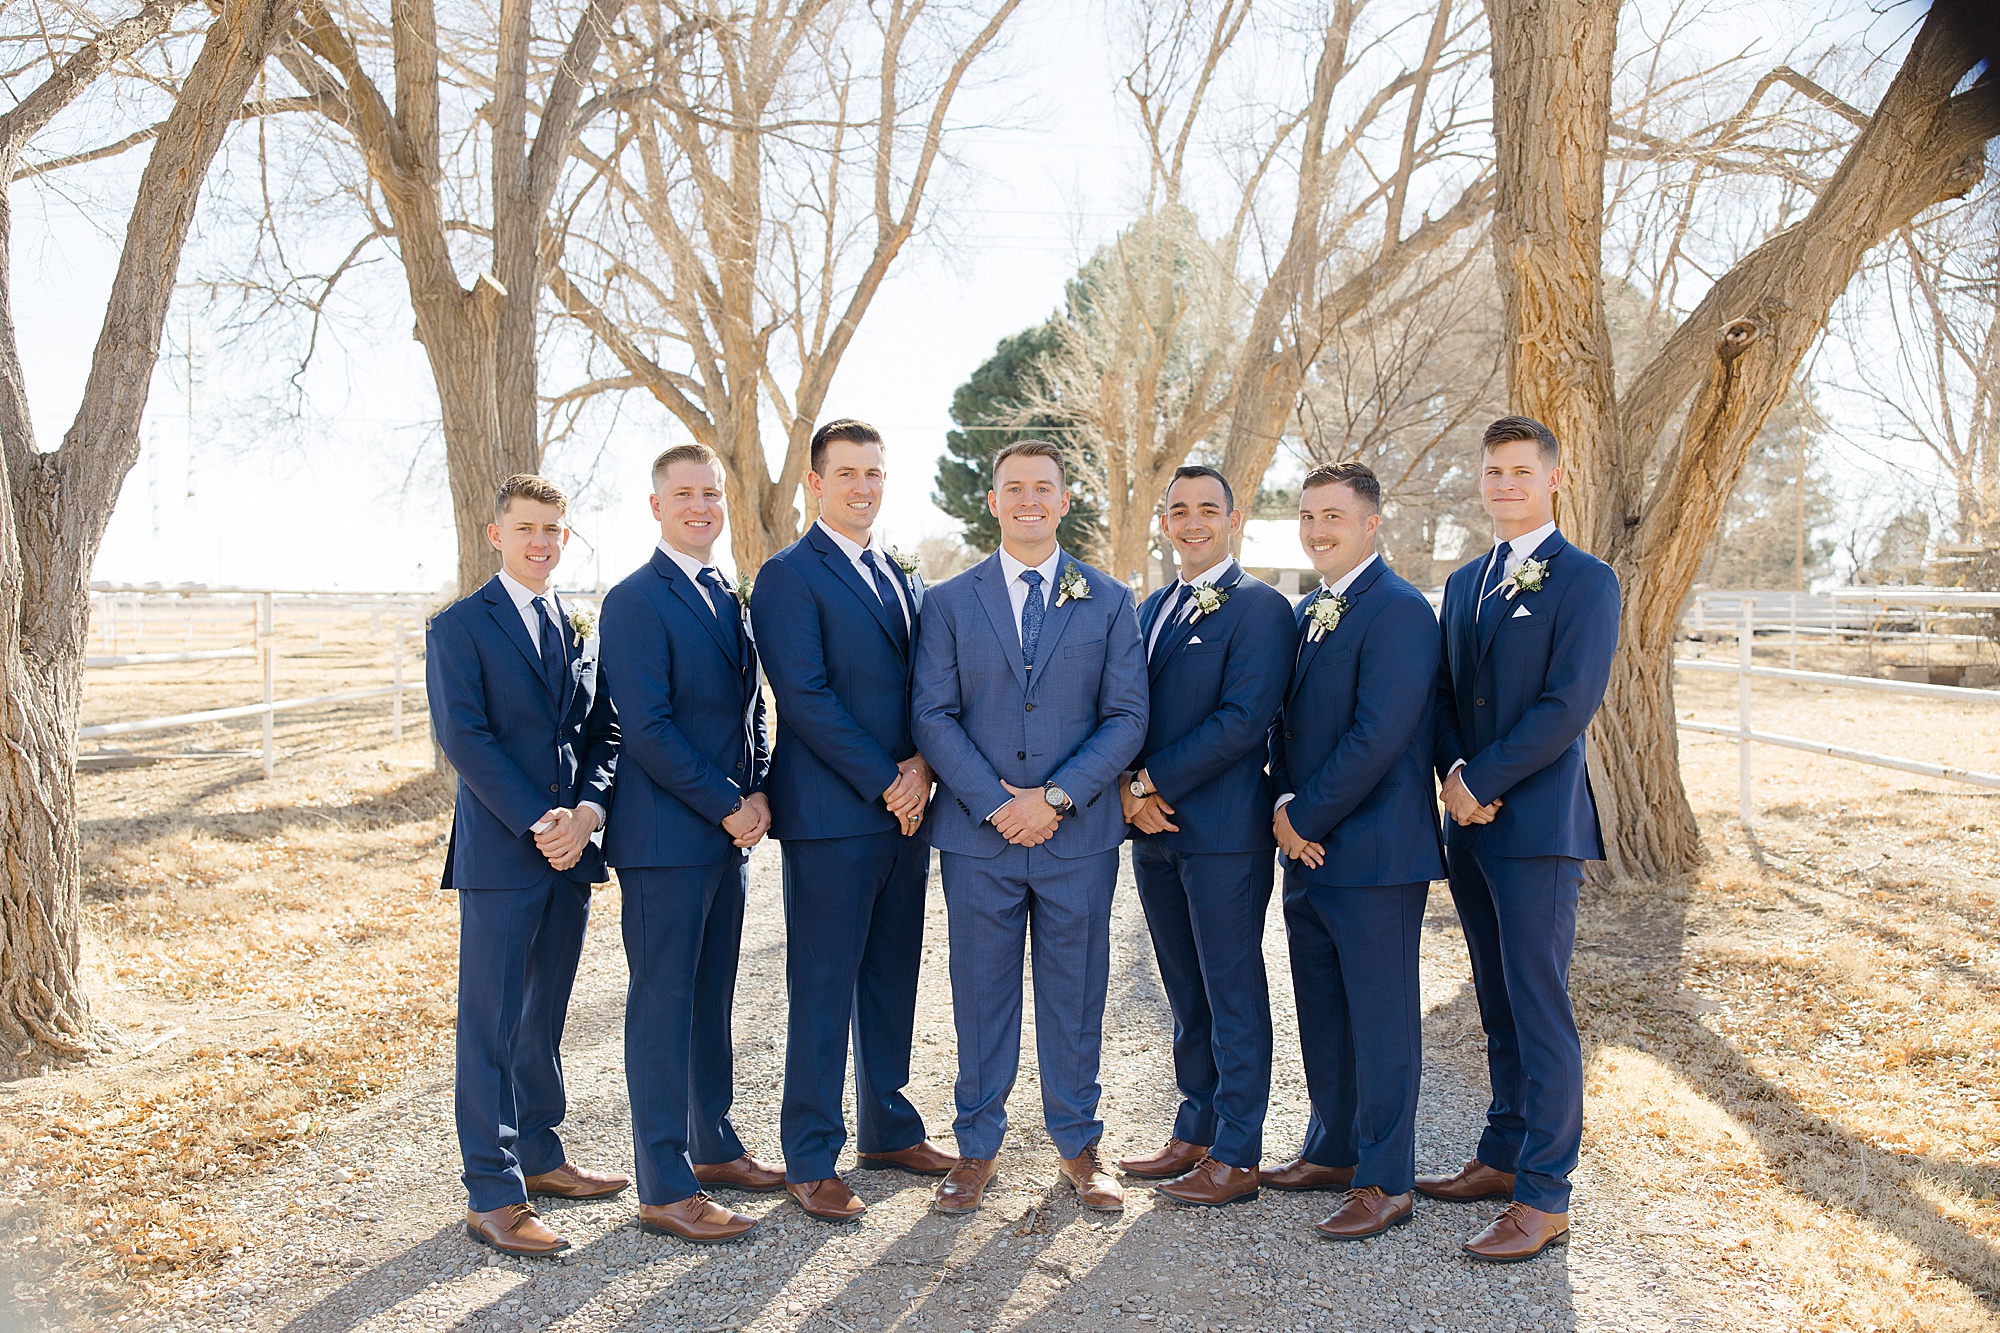 groom and groomsmen in navy suits pose together before winter wedding in Rosewell, New Mexico